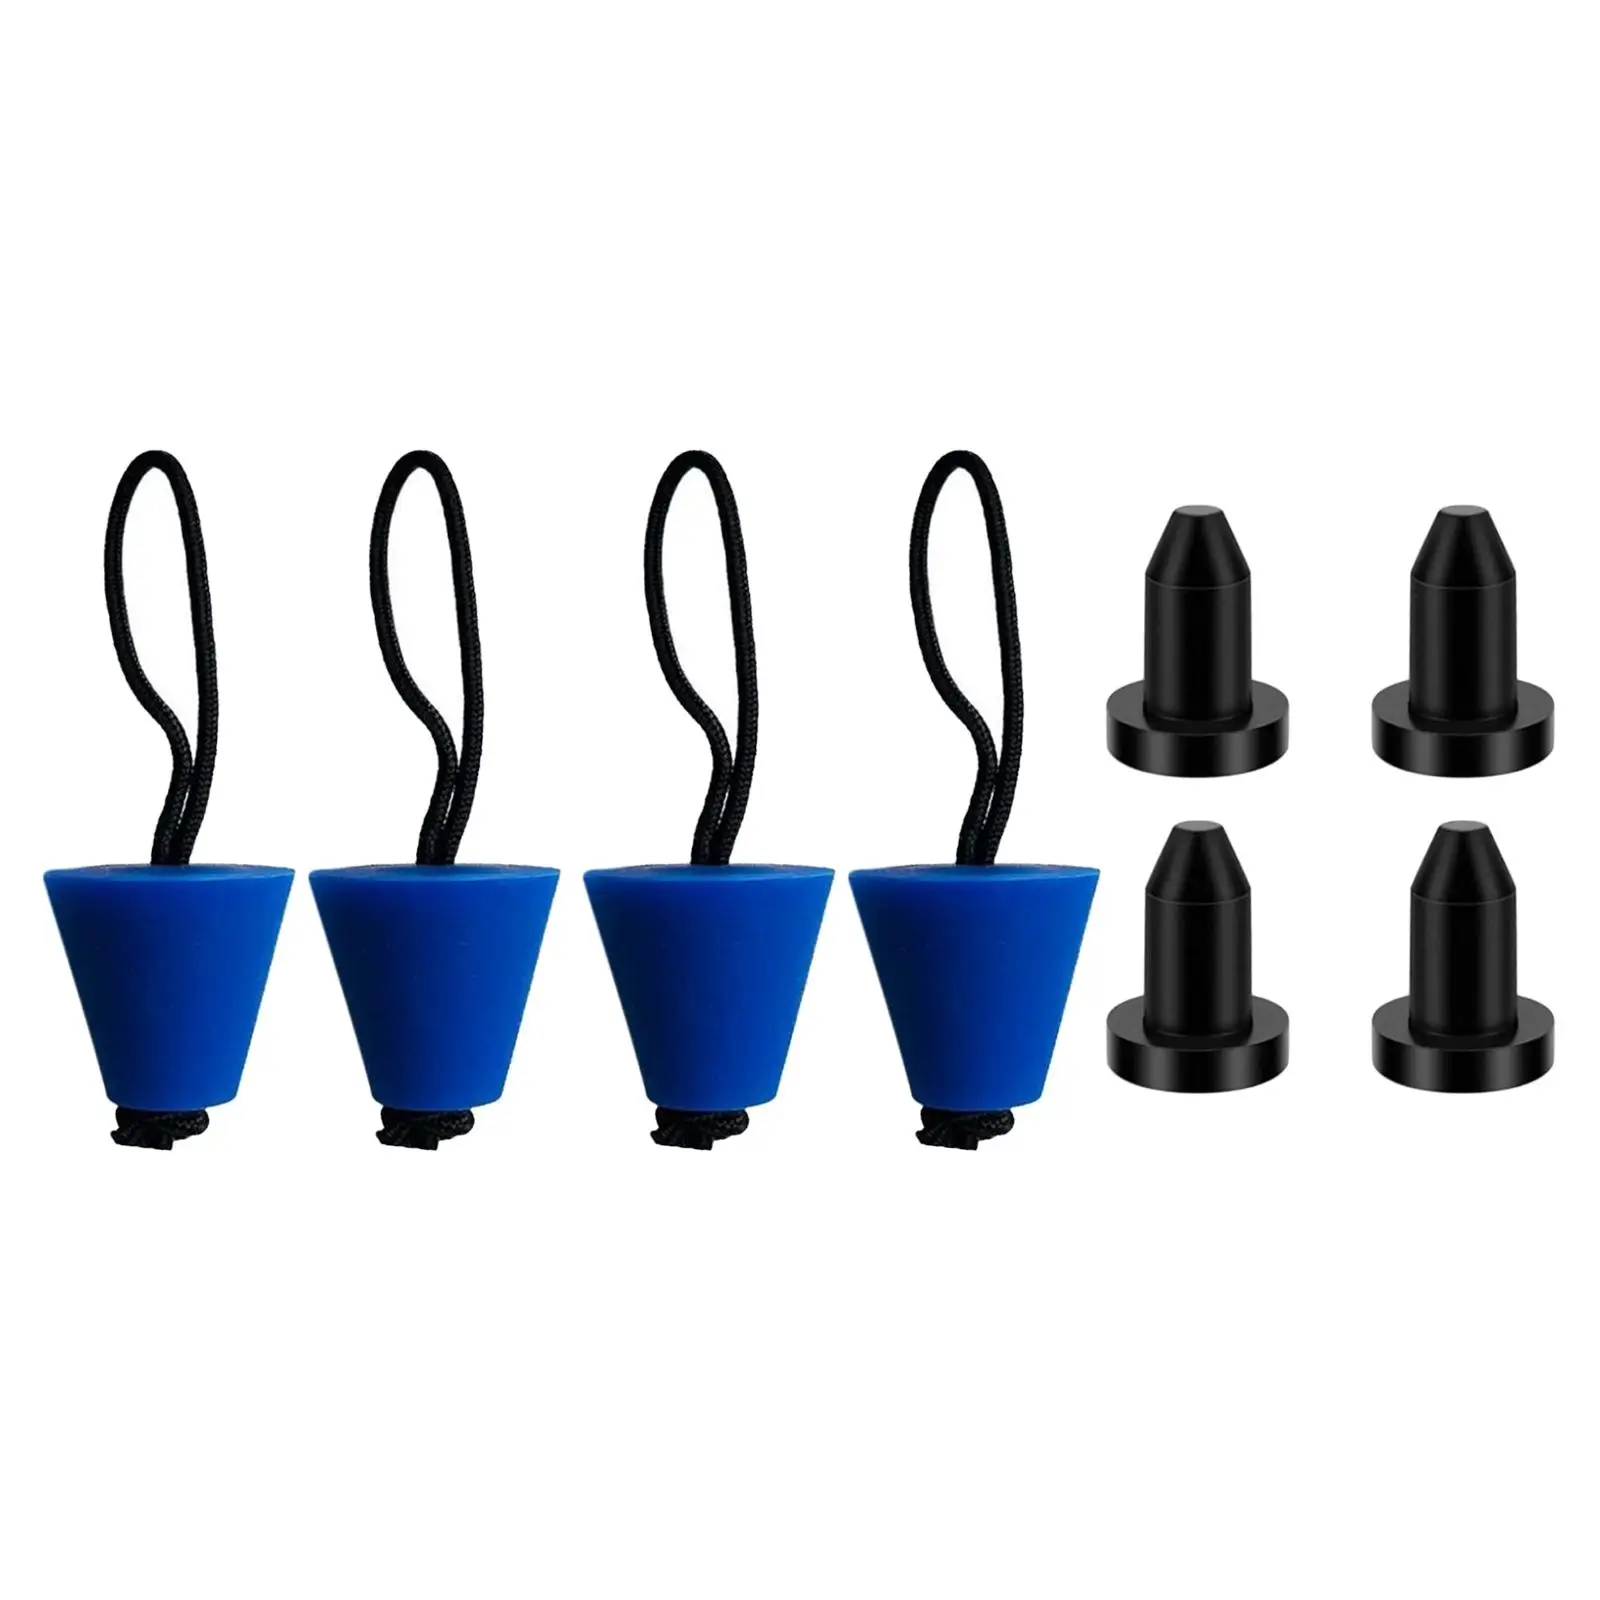 8Pcs Kayak Scupper Plug Kit Direct Replaces Sit on Top Silicone Drain Holes Stopper Bung for Boat Dinghy Raft Yacht Water Sports